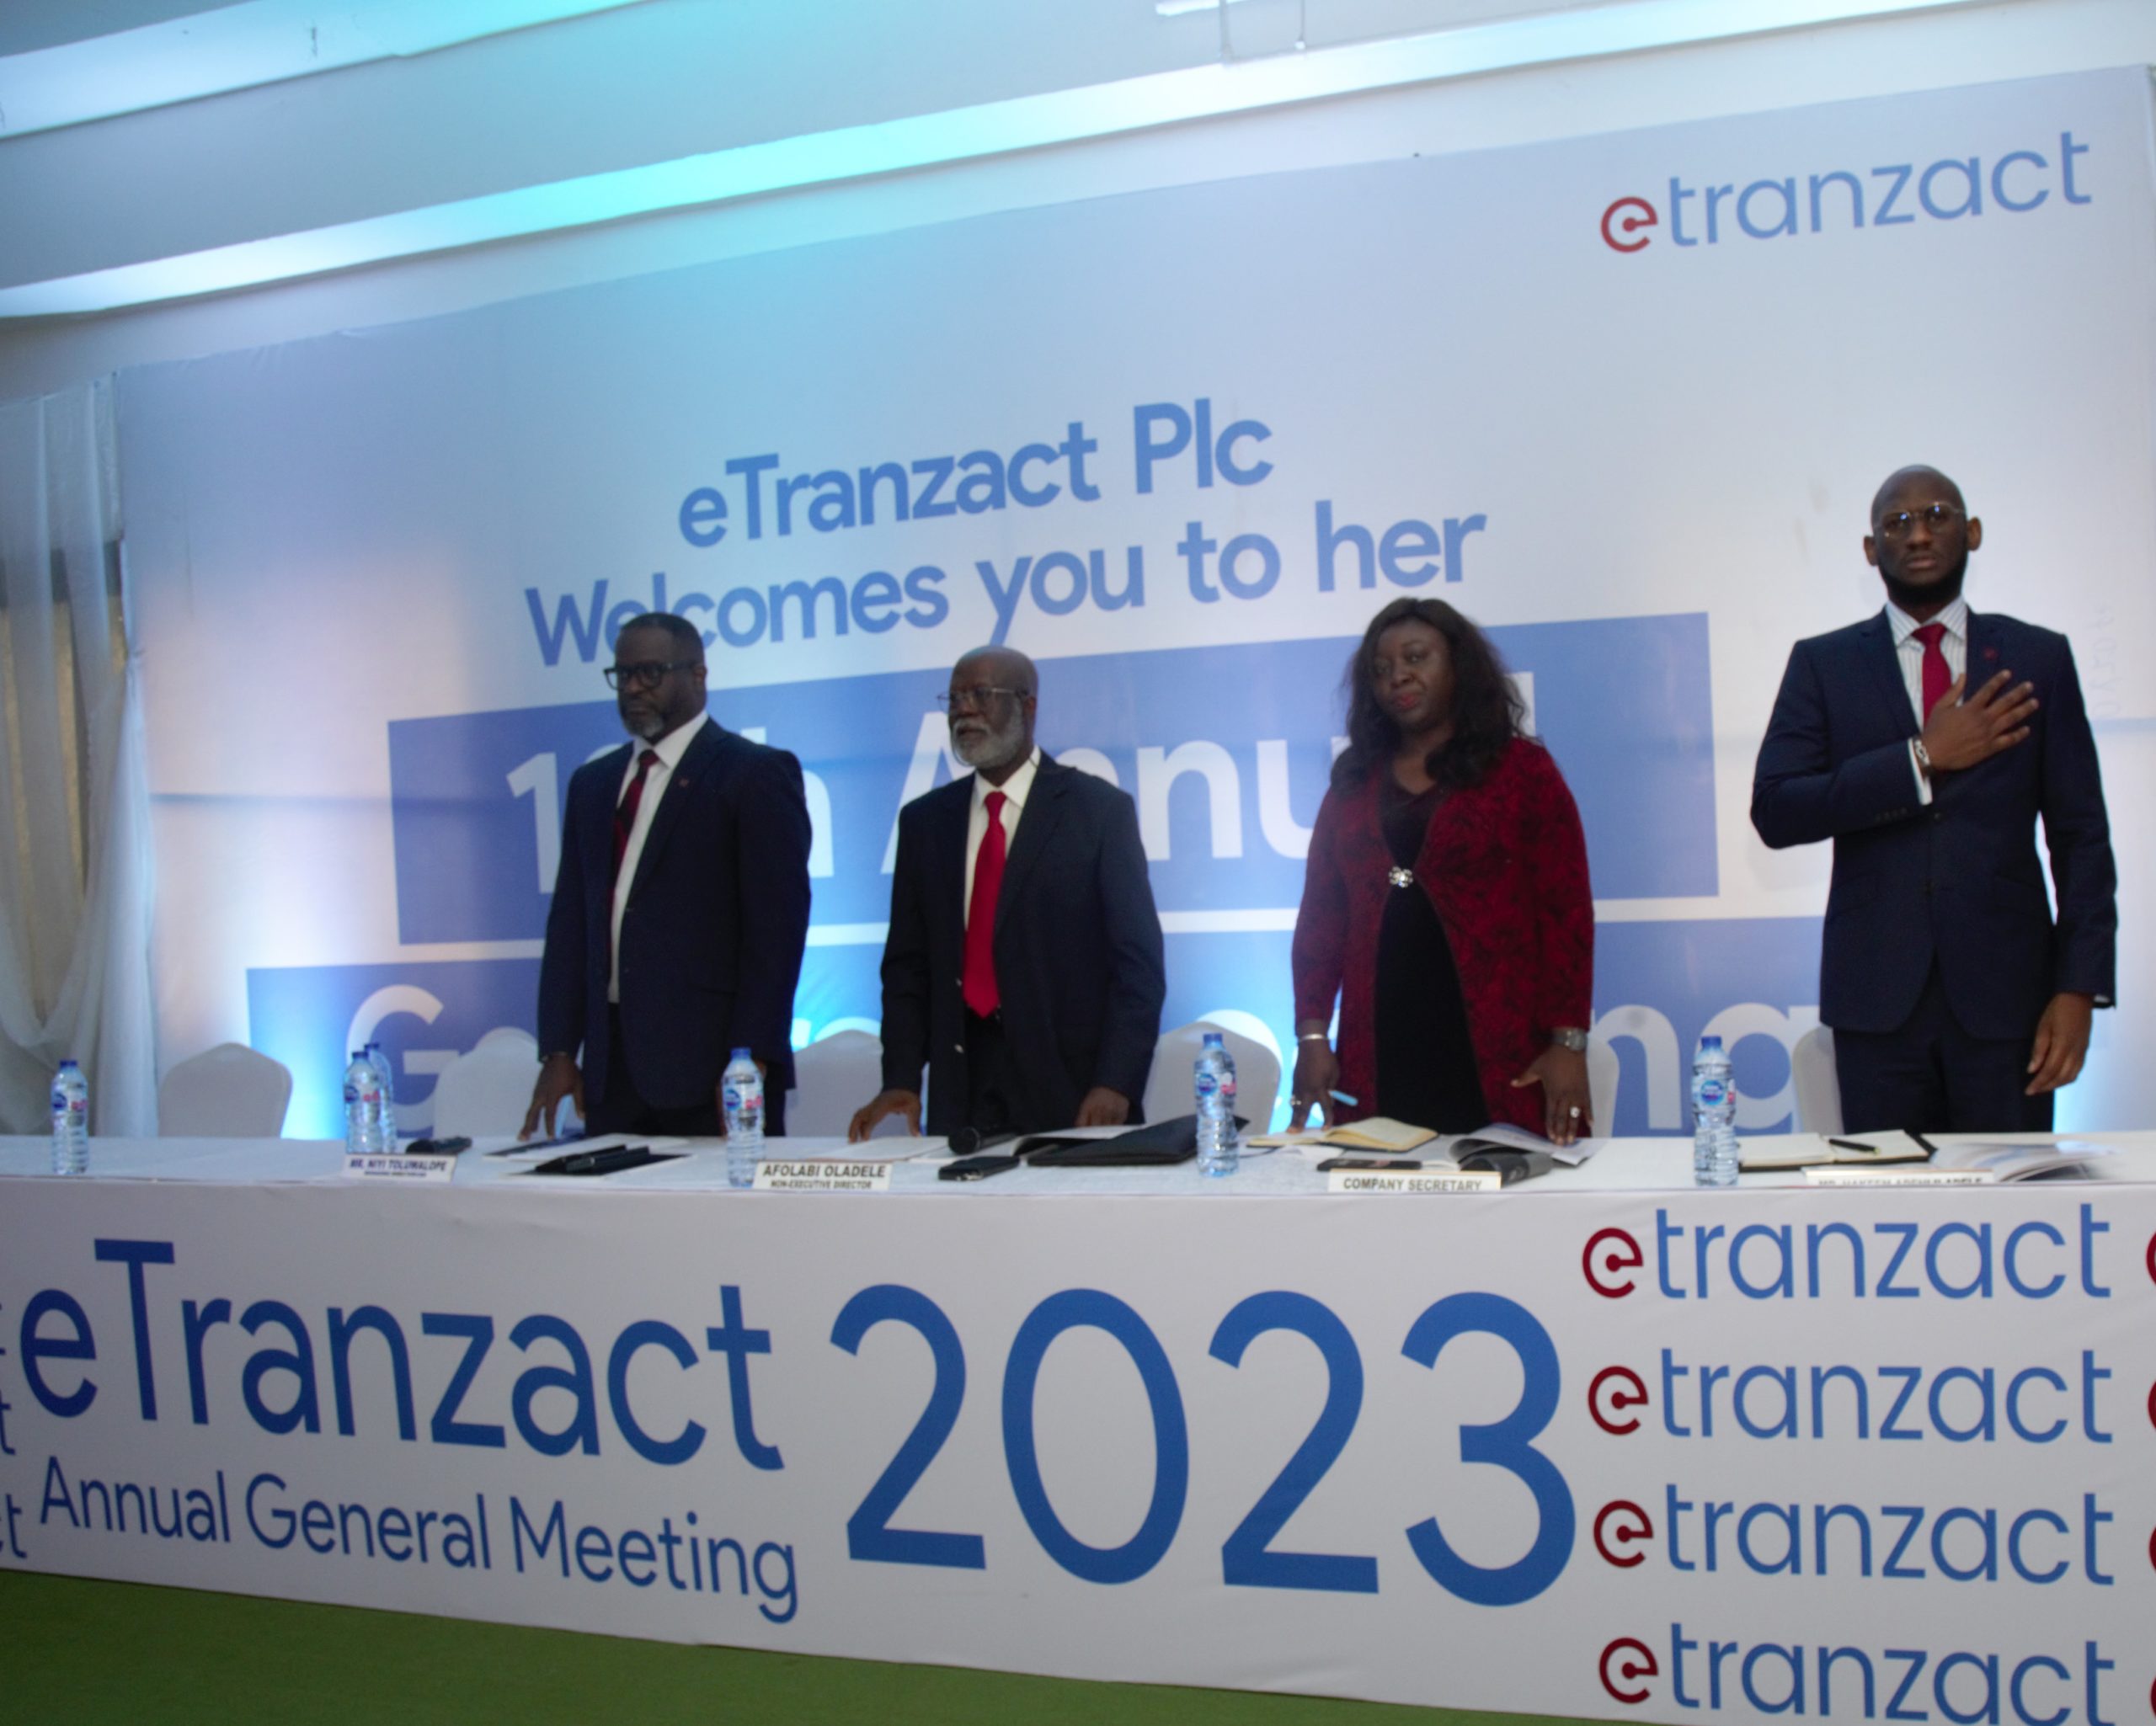 eTranzact Plc at the 19th Annual
General Meeting